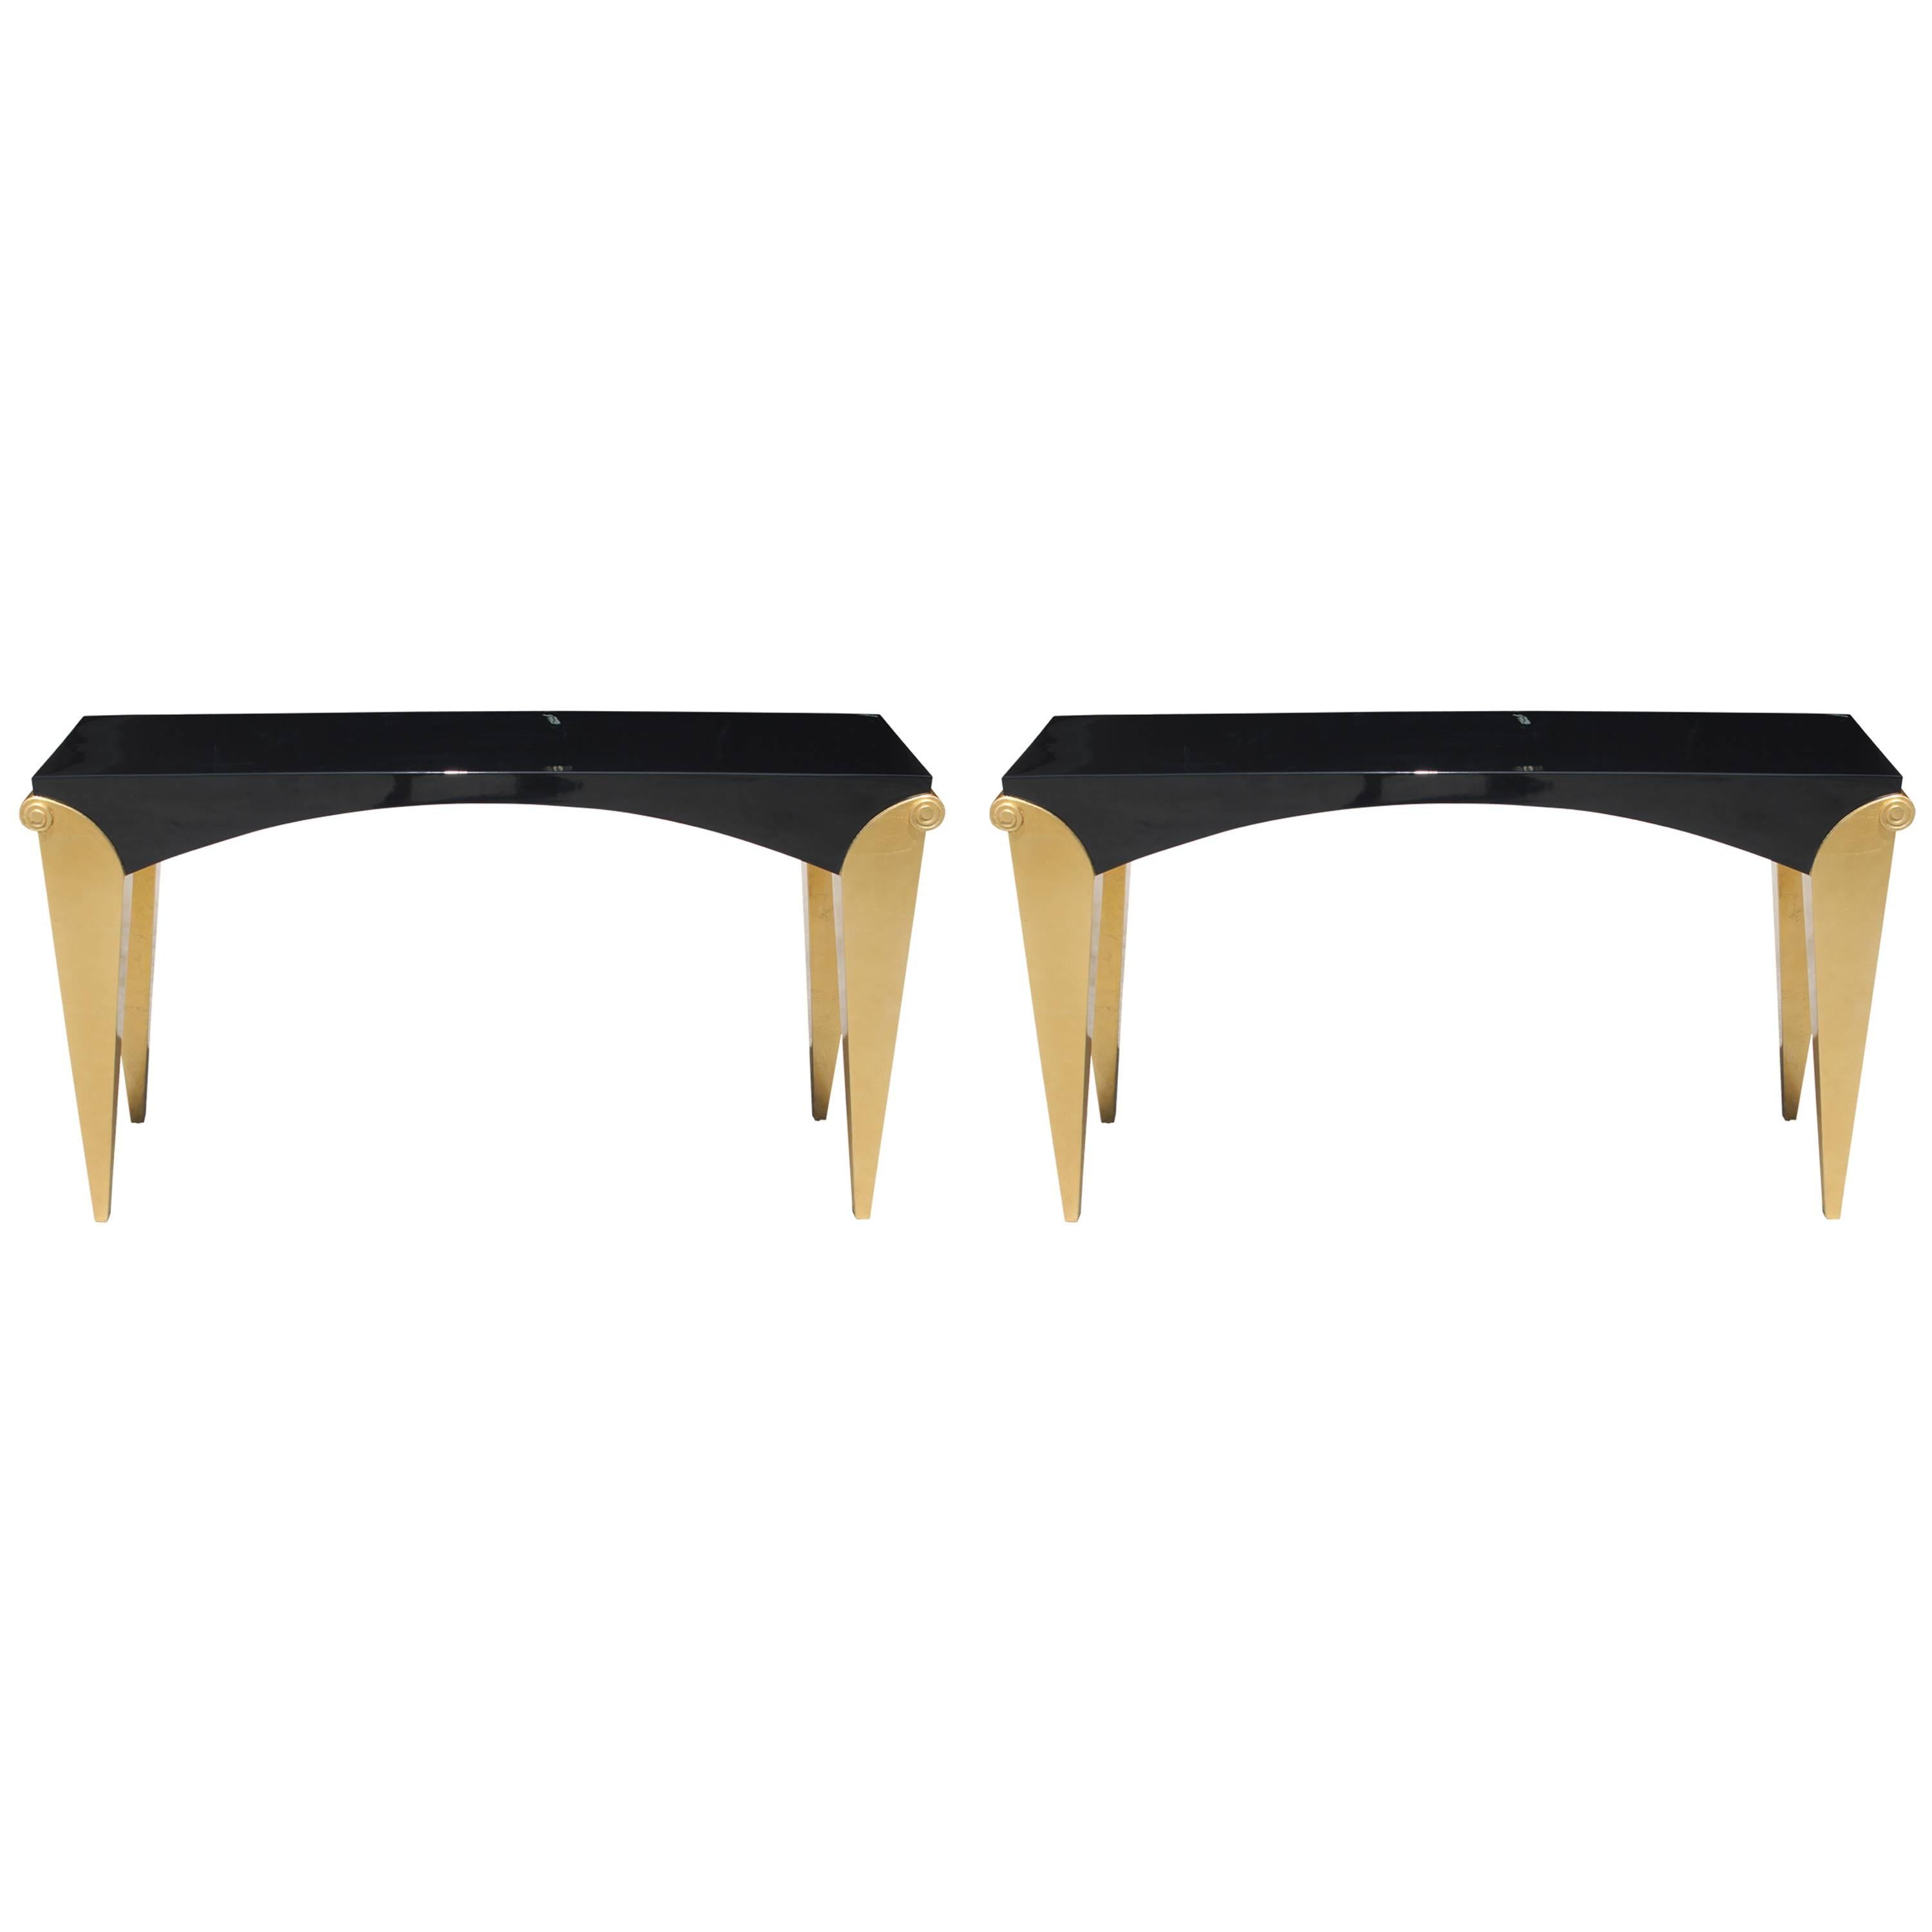 Pair of French Art Deco Giltwood/ Black Lacquered Console Tables, circa 1940s